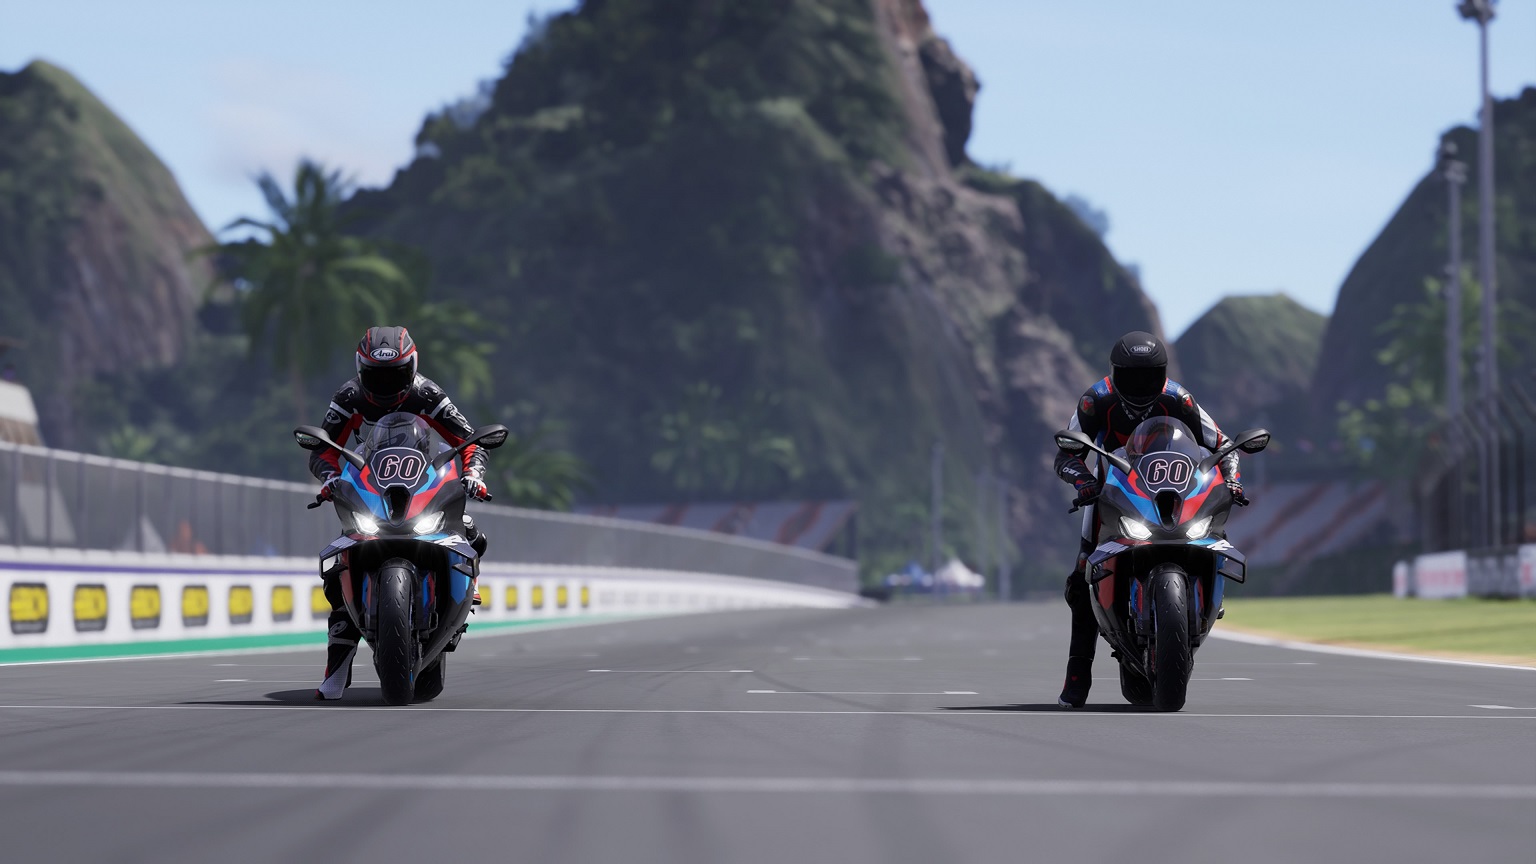 Test Ride 5 PS5